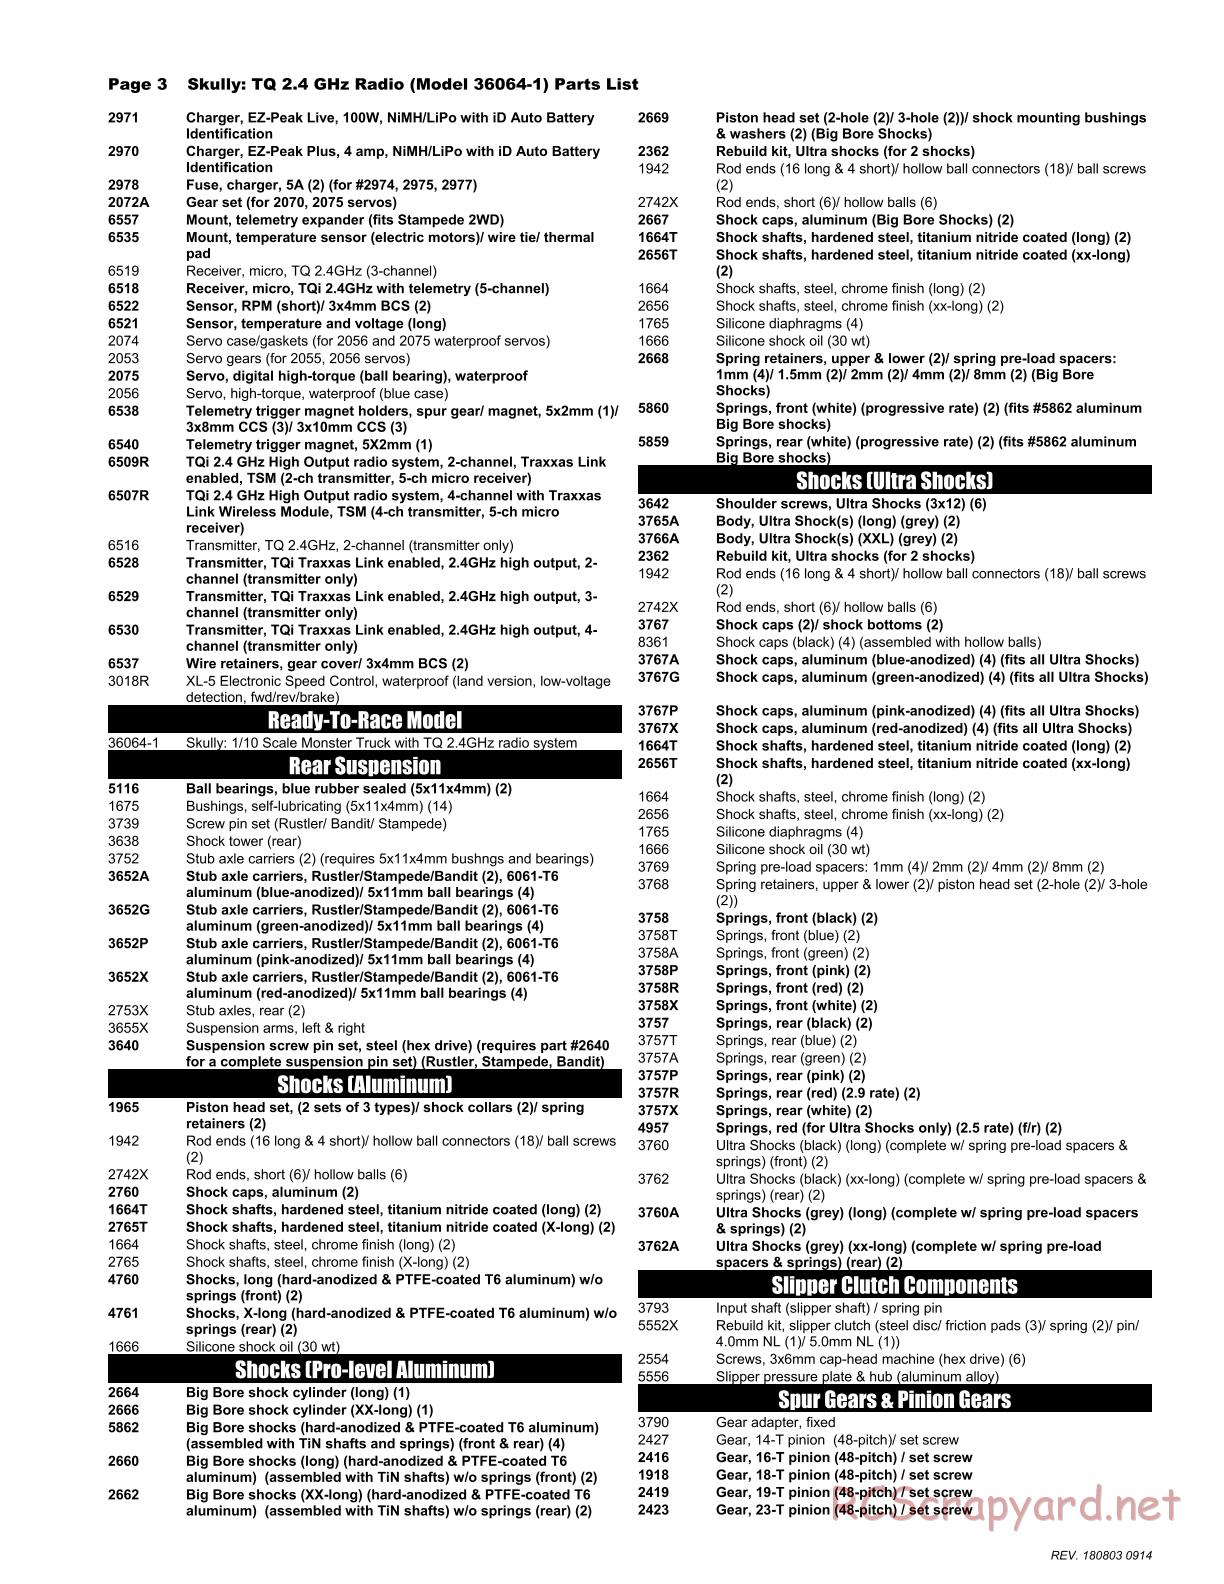 Traxxas - Skully - Parts List - Page 3